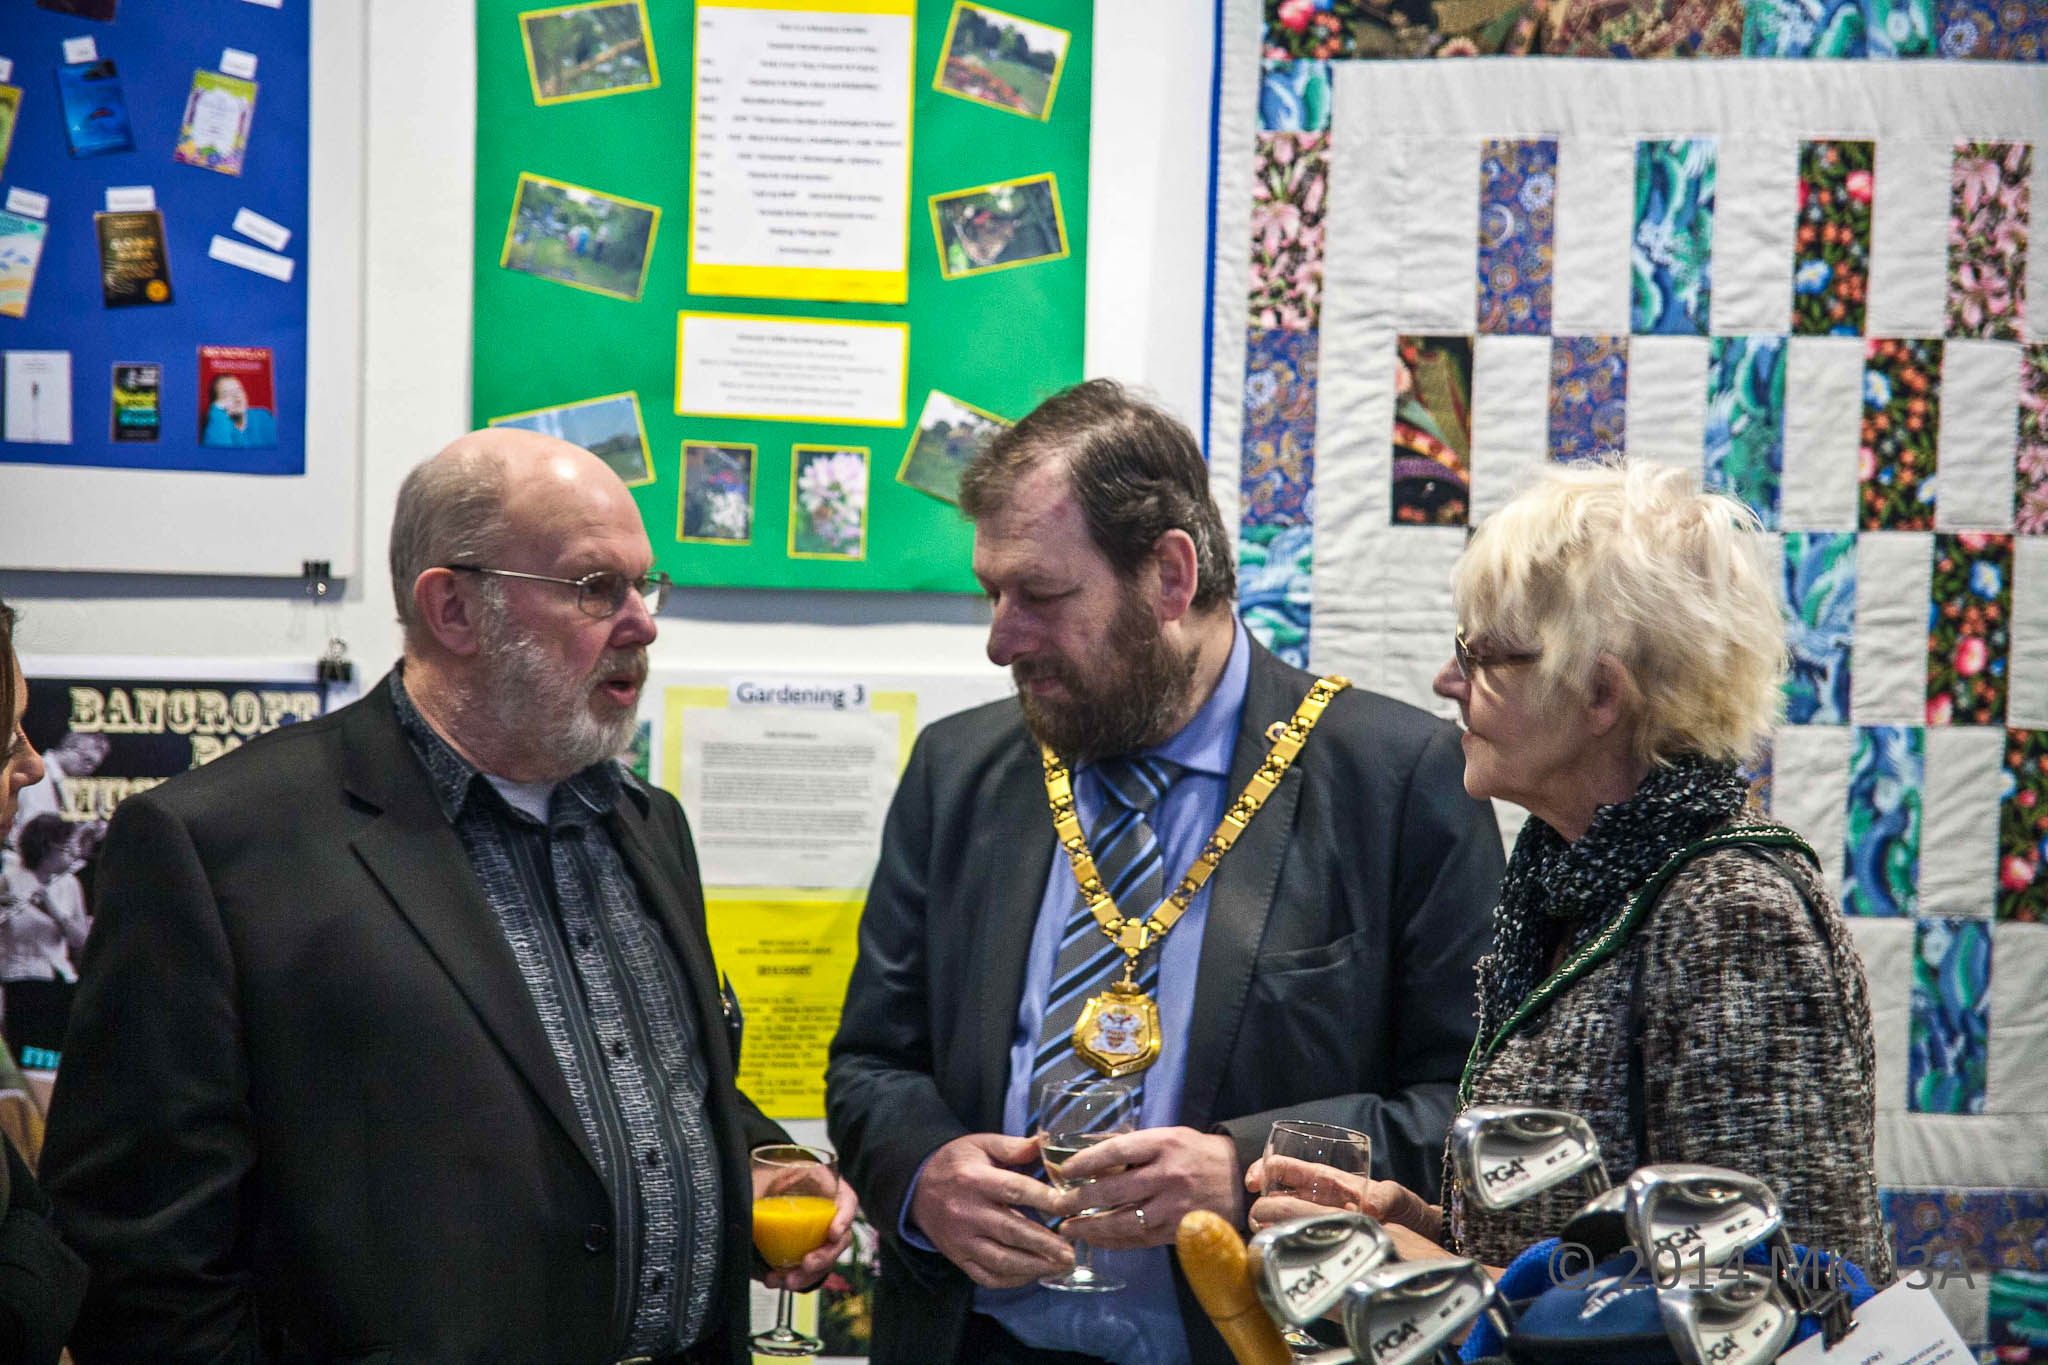 The Mayor of Milton Keynes, Councillor Brian White and Mayoress, Mrs Leena Lindholm-White talk with MKU3A Webmaster Derek Barrett about the exhibition